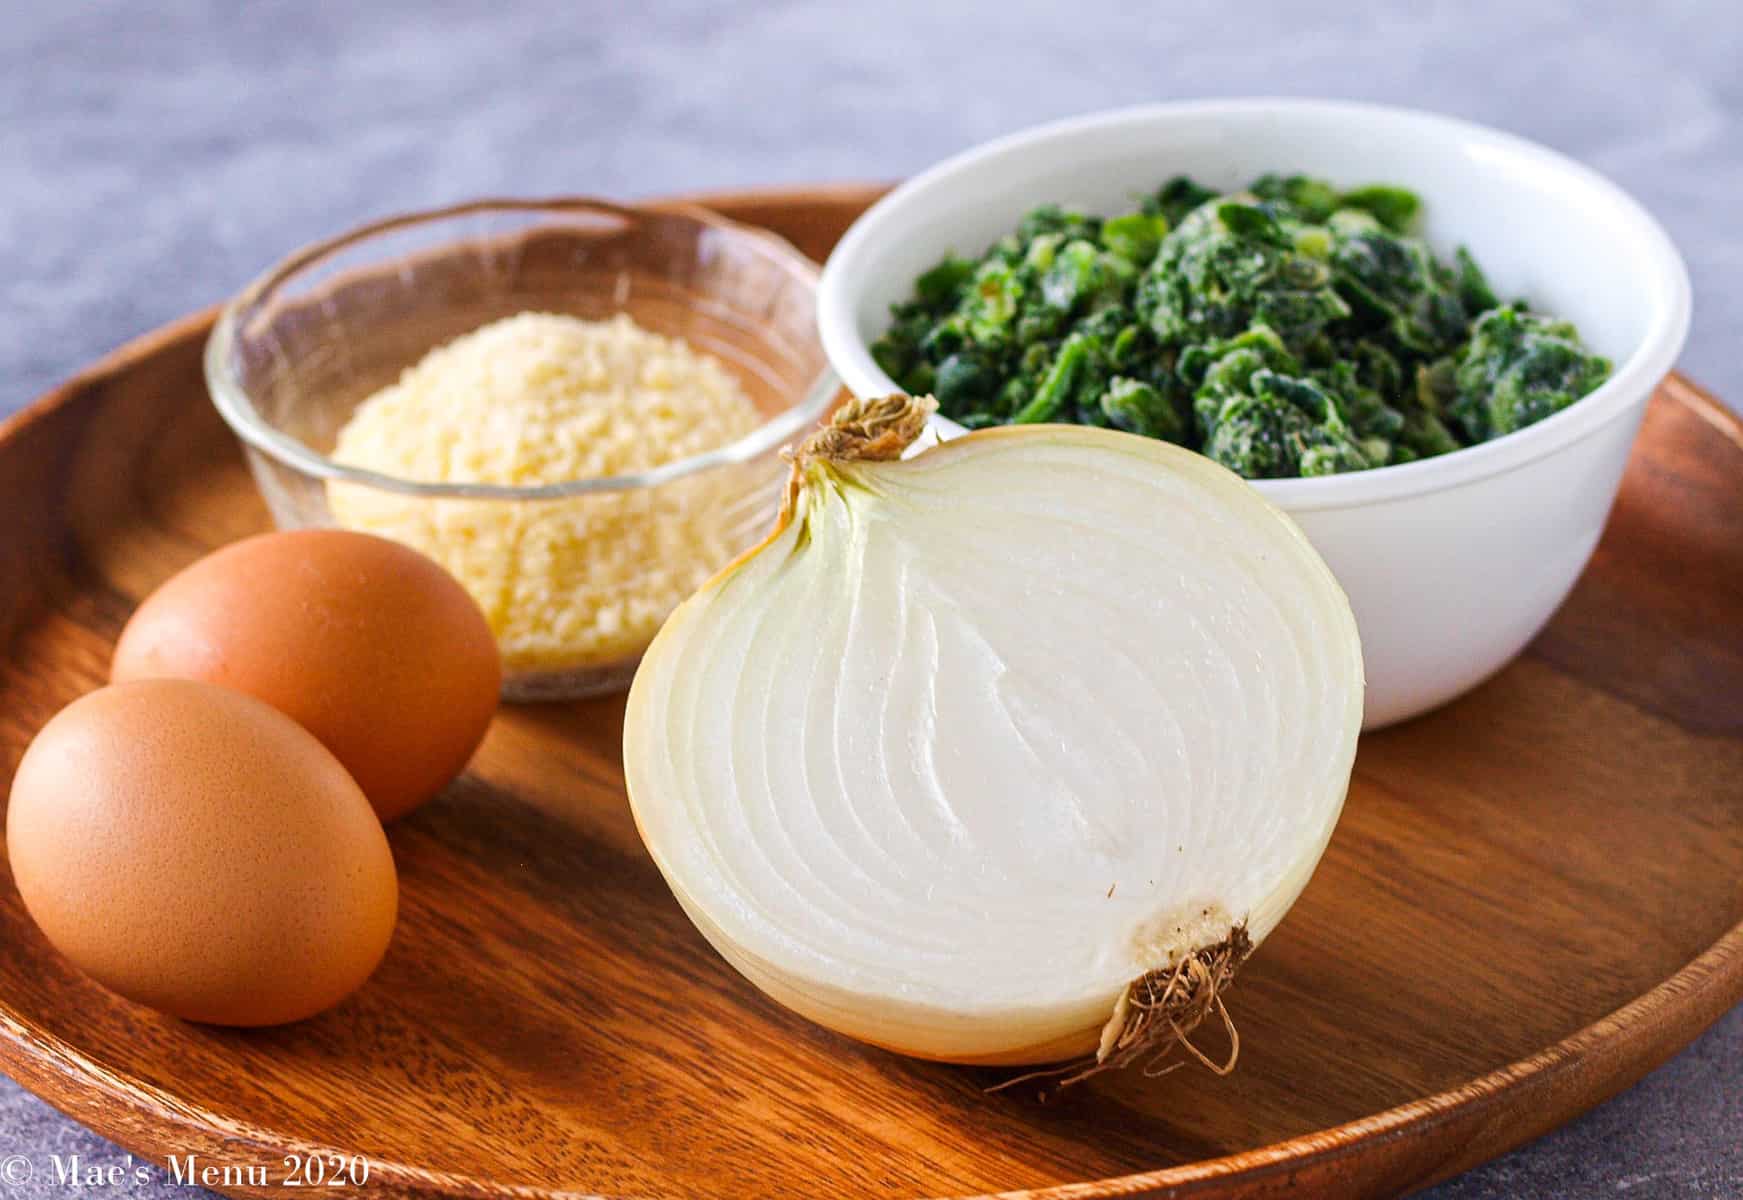 A side angle shot of a wooden tray of ingredients: eggs, parmesan cheese, an onion, and frozen spinach